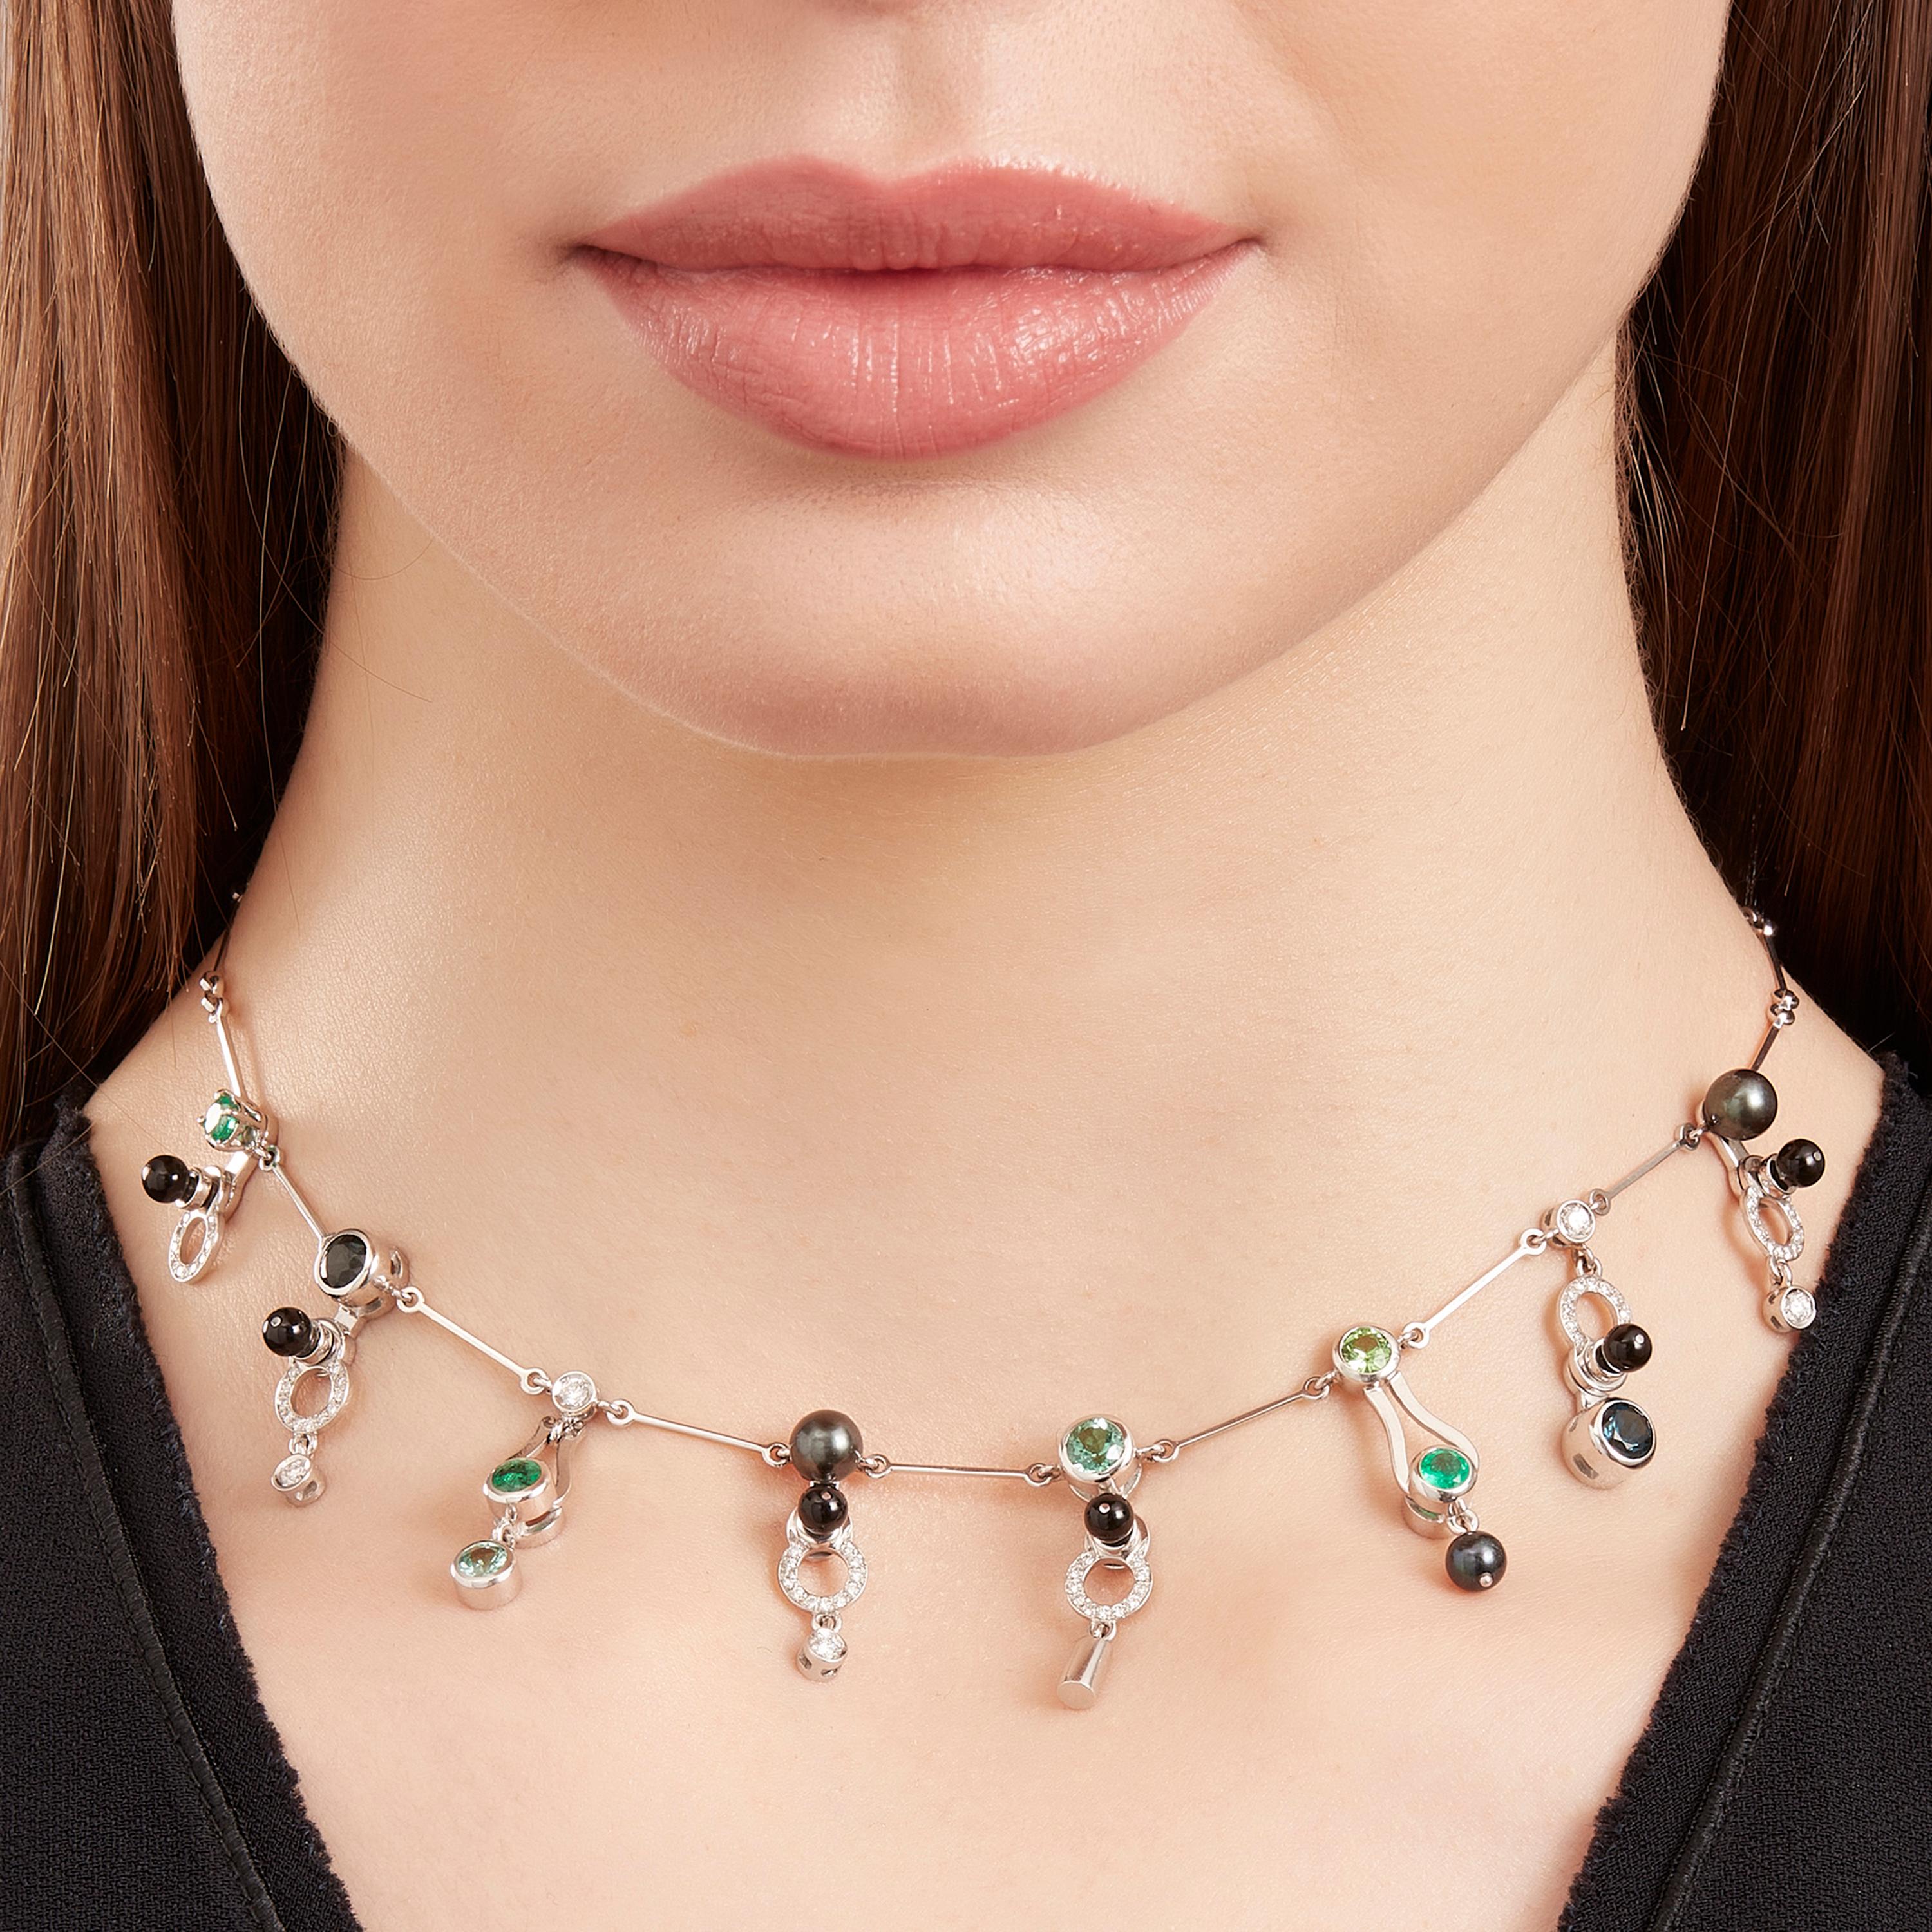 Microrock Choker Necklace is devised as a game, a construction or a sophisticated aerial mobile. Shapes attached to gold rings dangle lightly around the neck, their geometry pierced by diamond (0,58 total carat), emerald, green tourmaline,